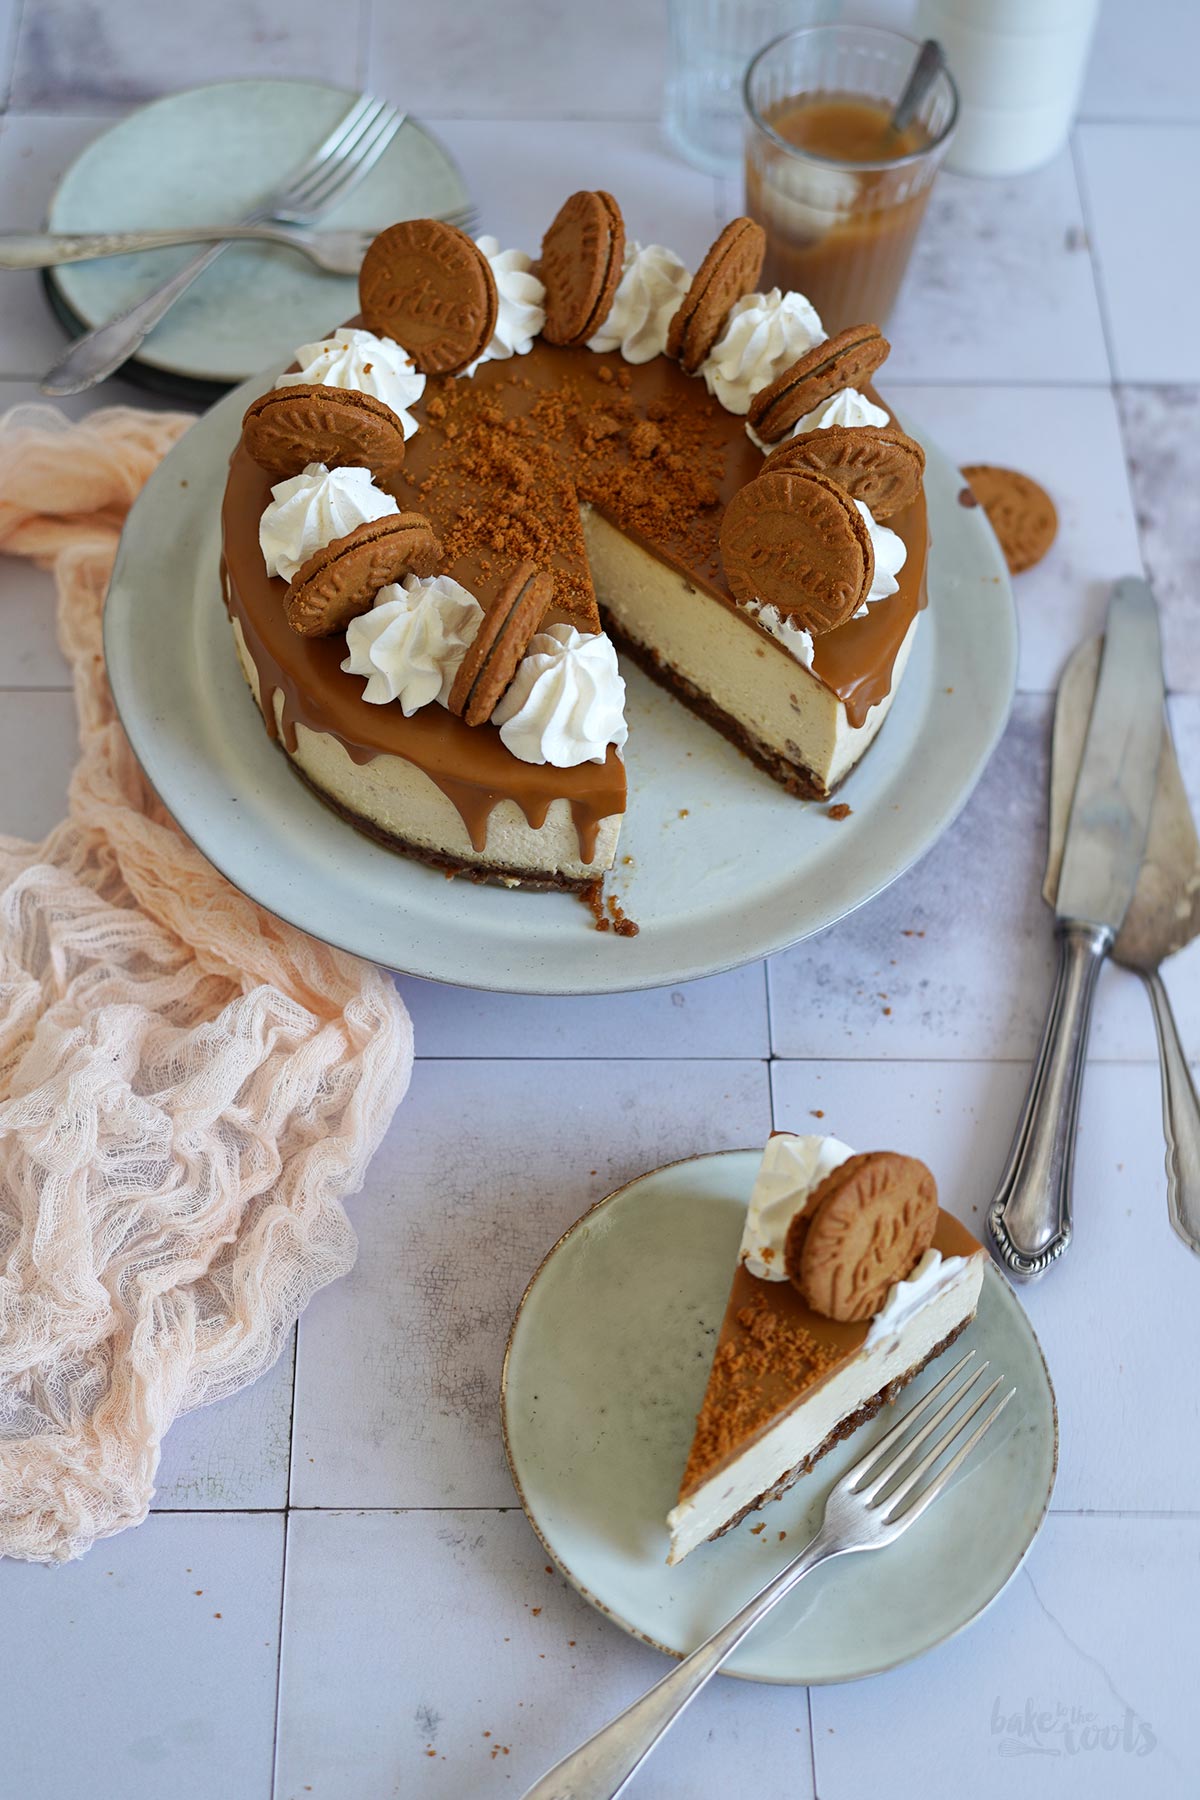 Baked Biscoff Cheesecake | Bake to the roots